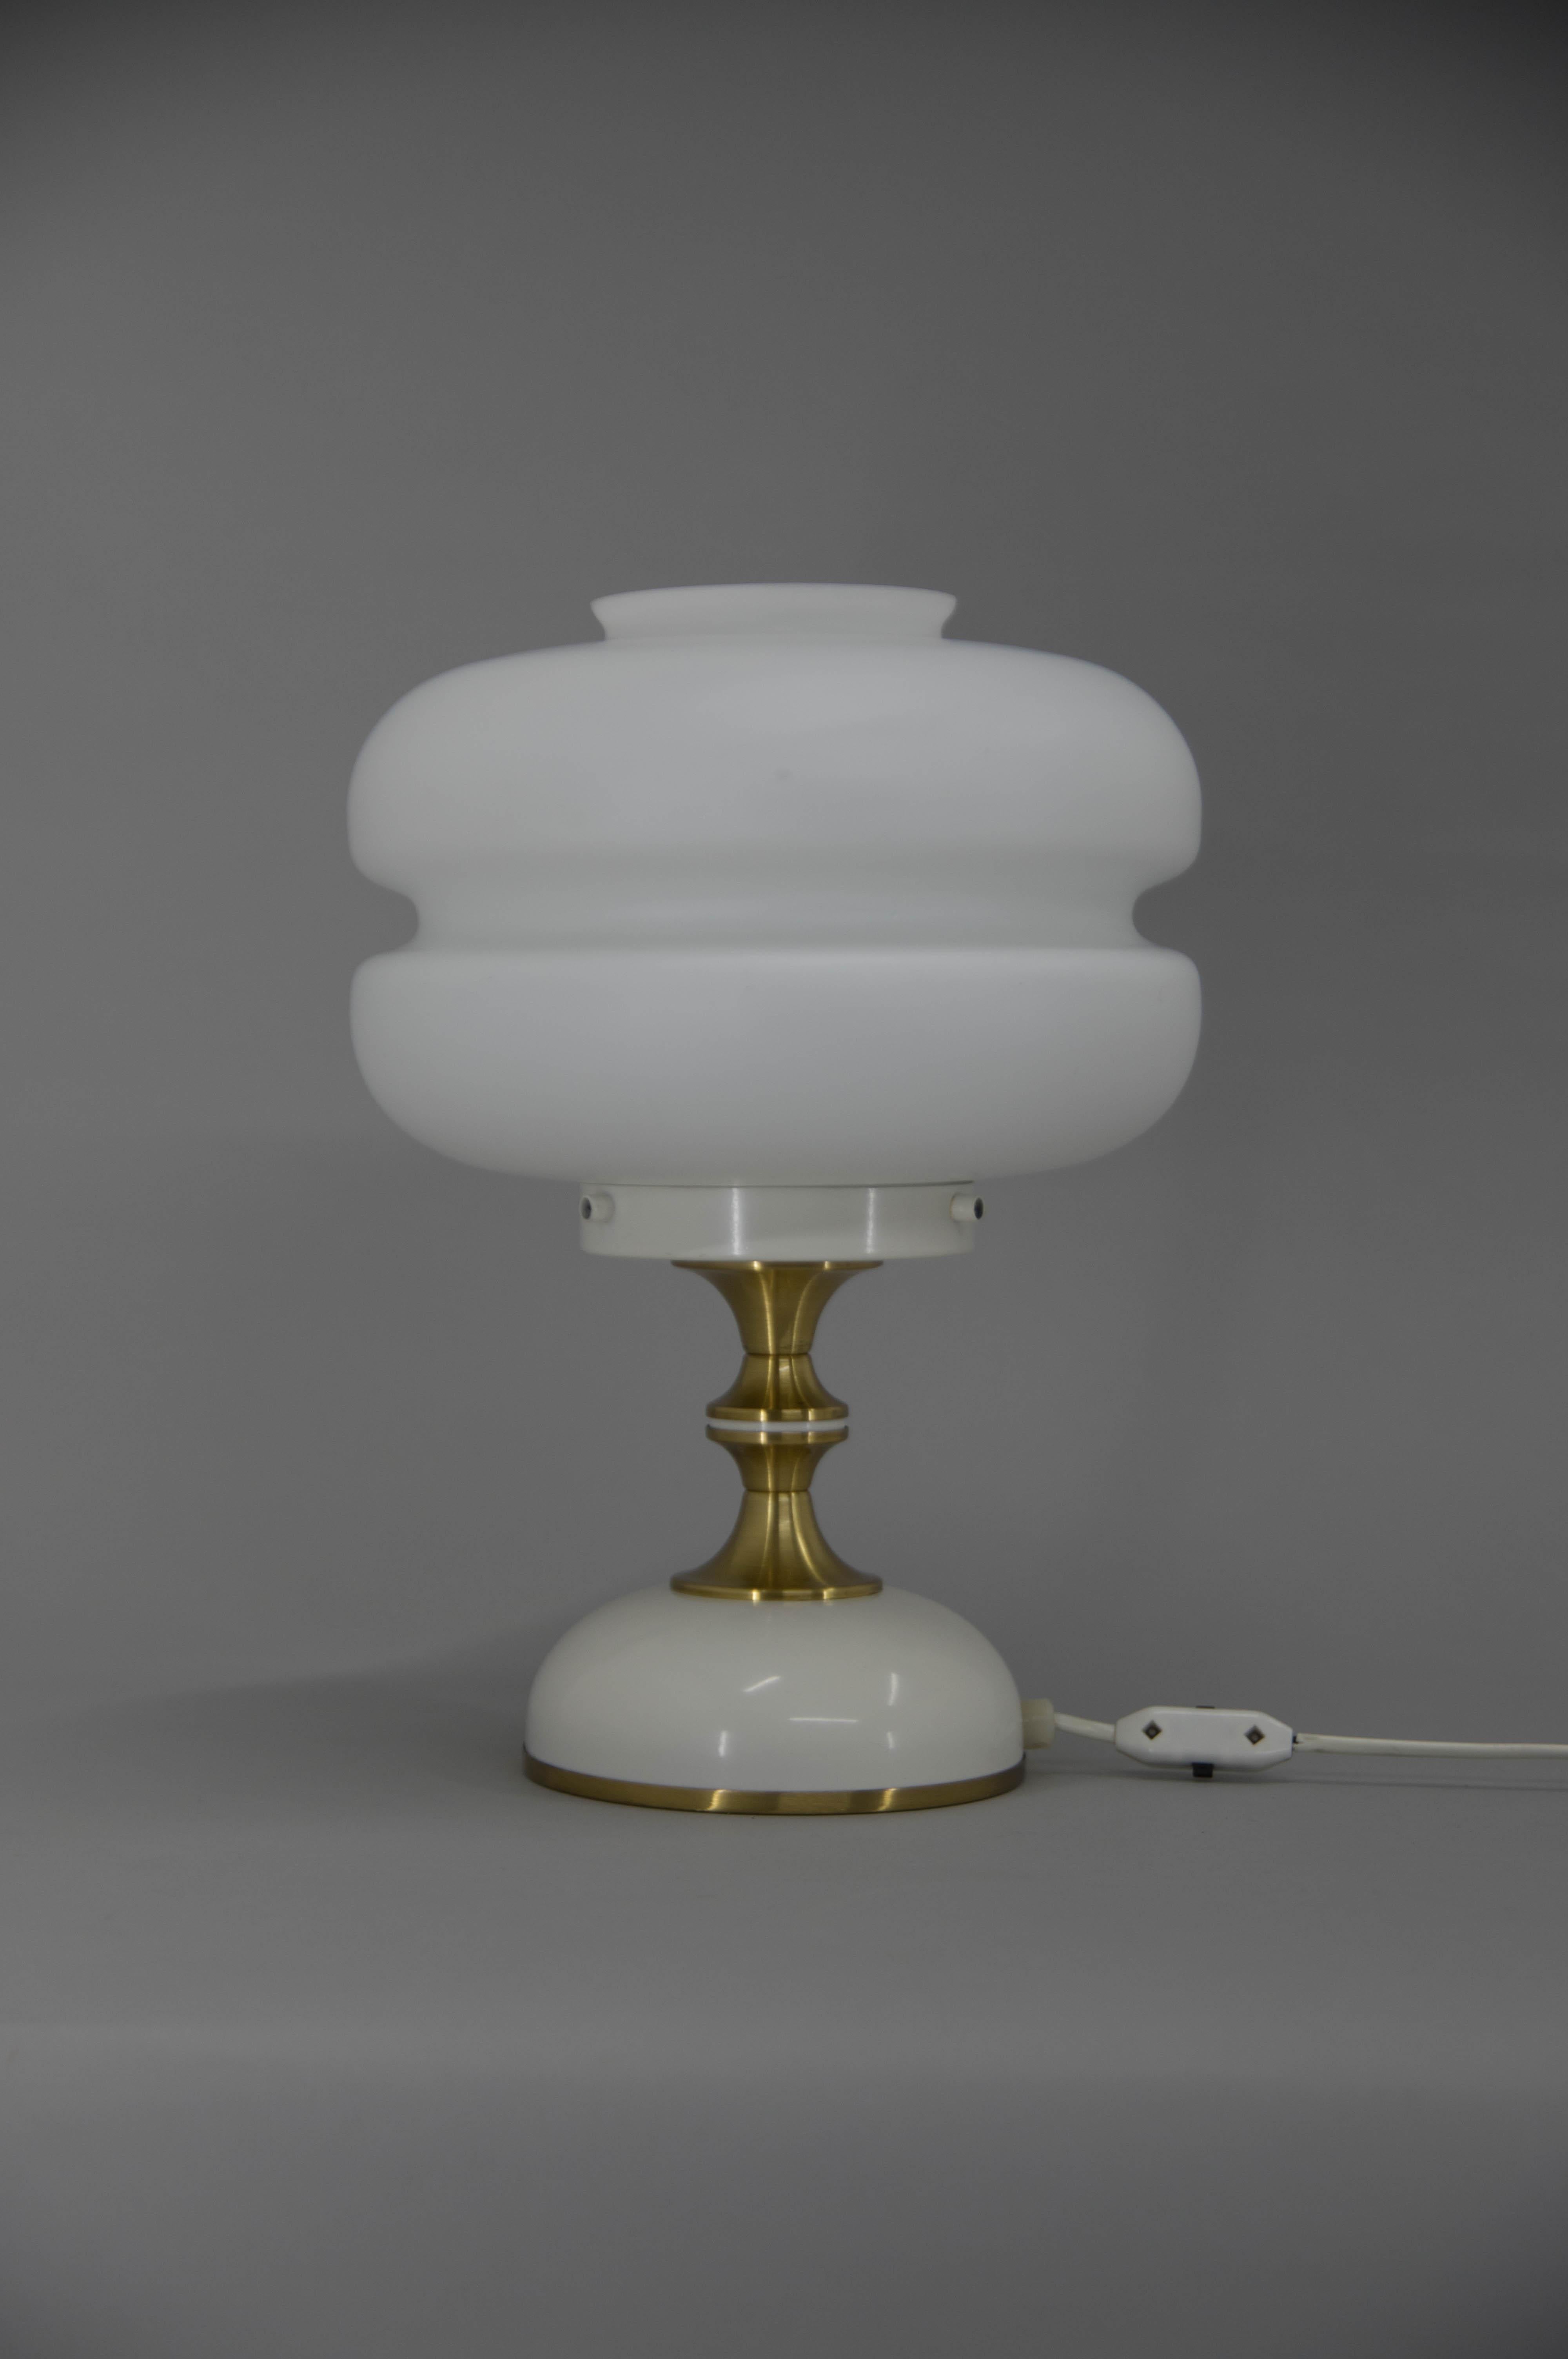 Table lamp made in Czechoslovakia in 1960s - 1970s.
Original excellent condition.
1x60W, E25-E27 bulb
US plug adapter included.